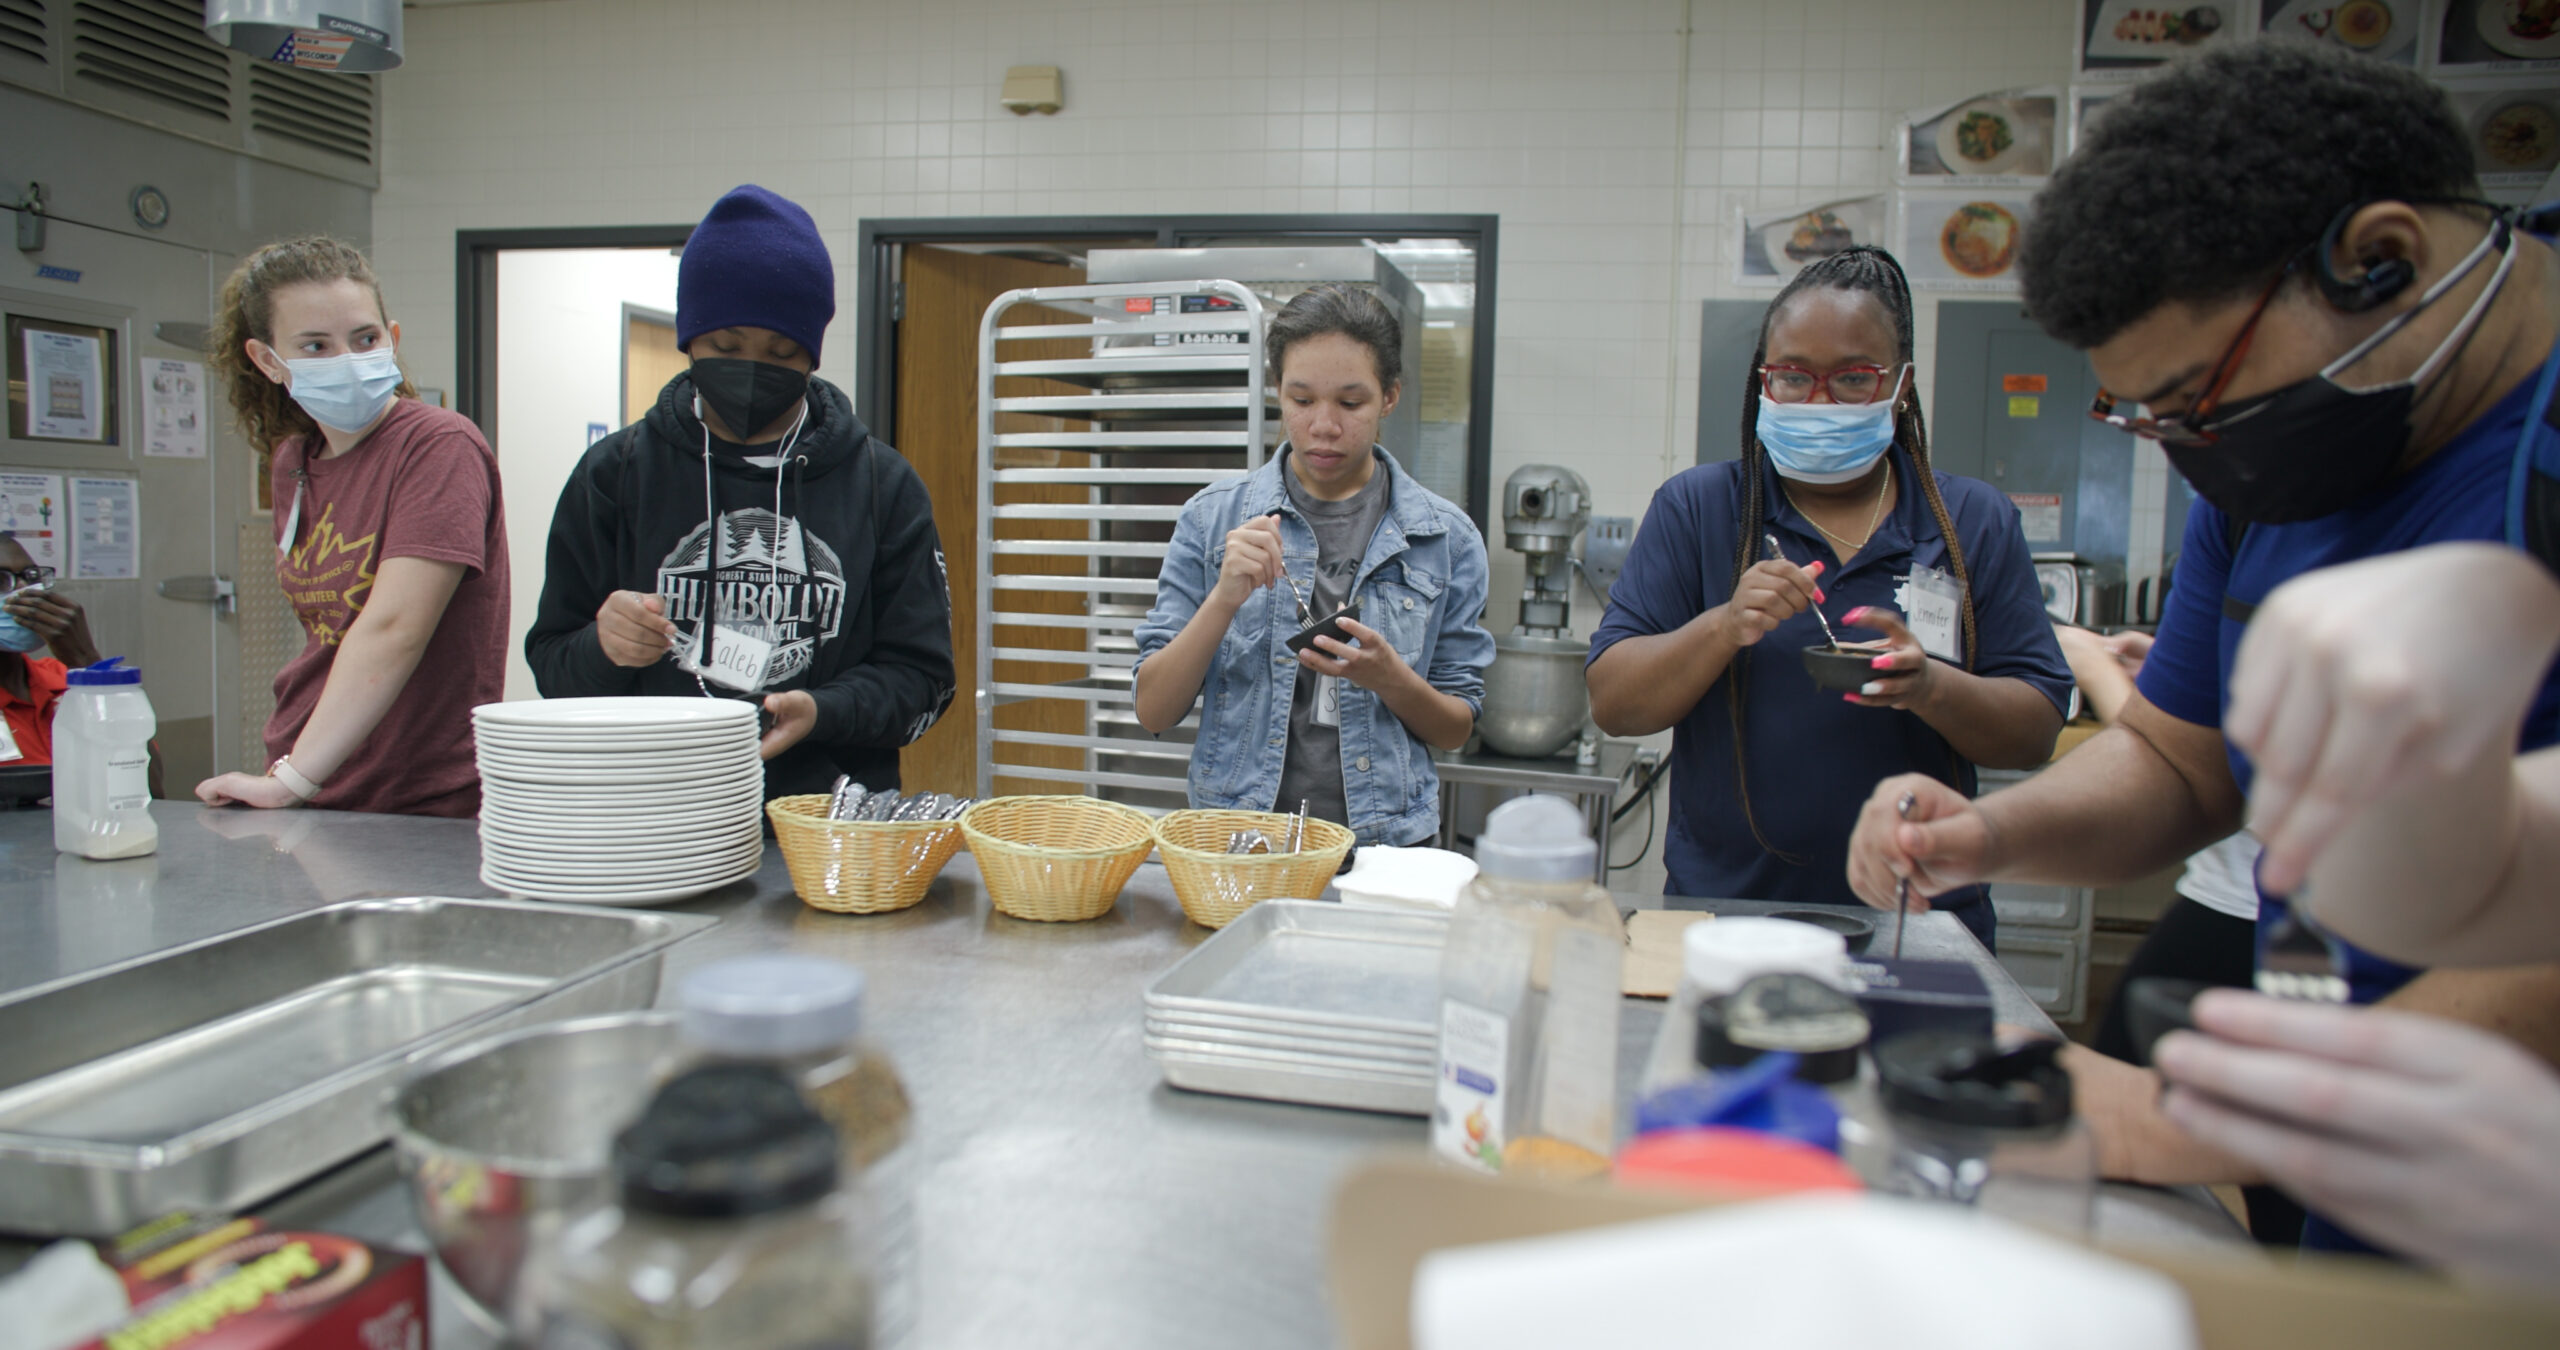 Several students mix ingredients in small bowls in a commercial kitchen